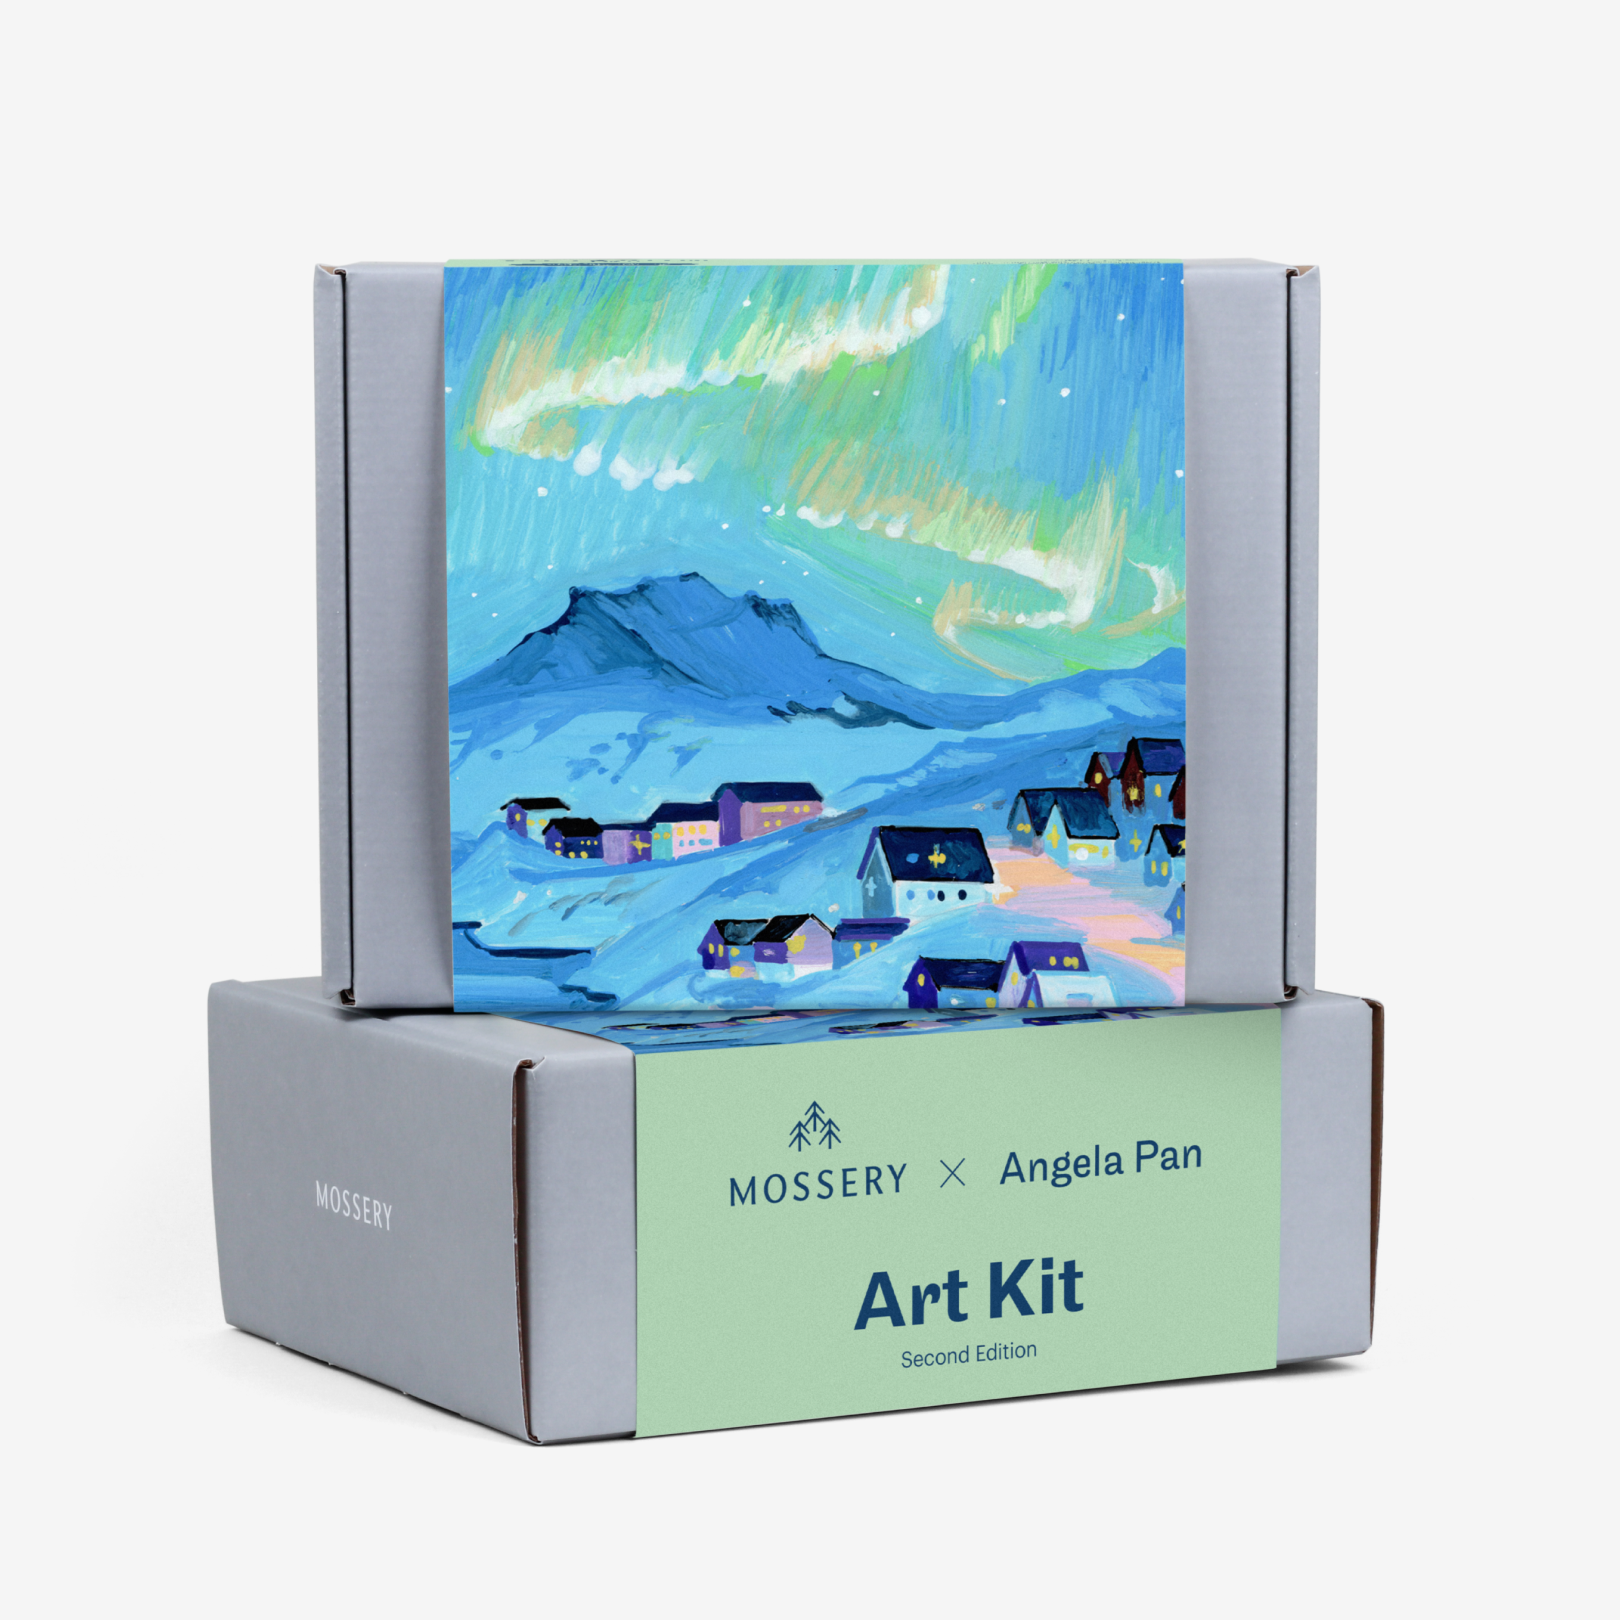 Mossery on X: Introducing Mossery Art Kits, a collection of